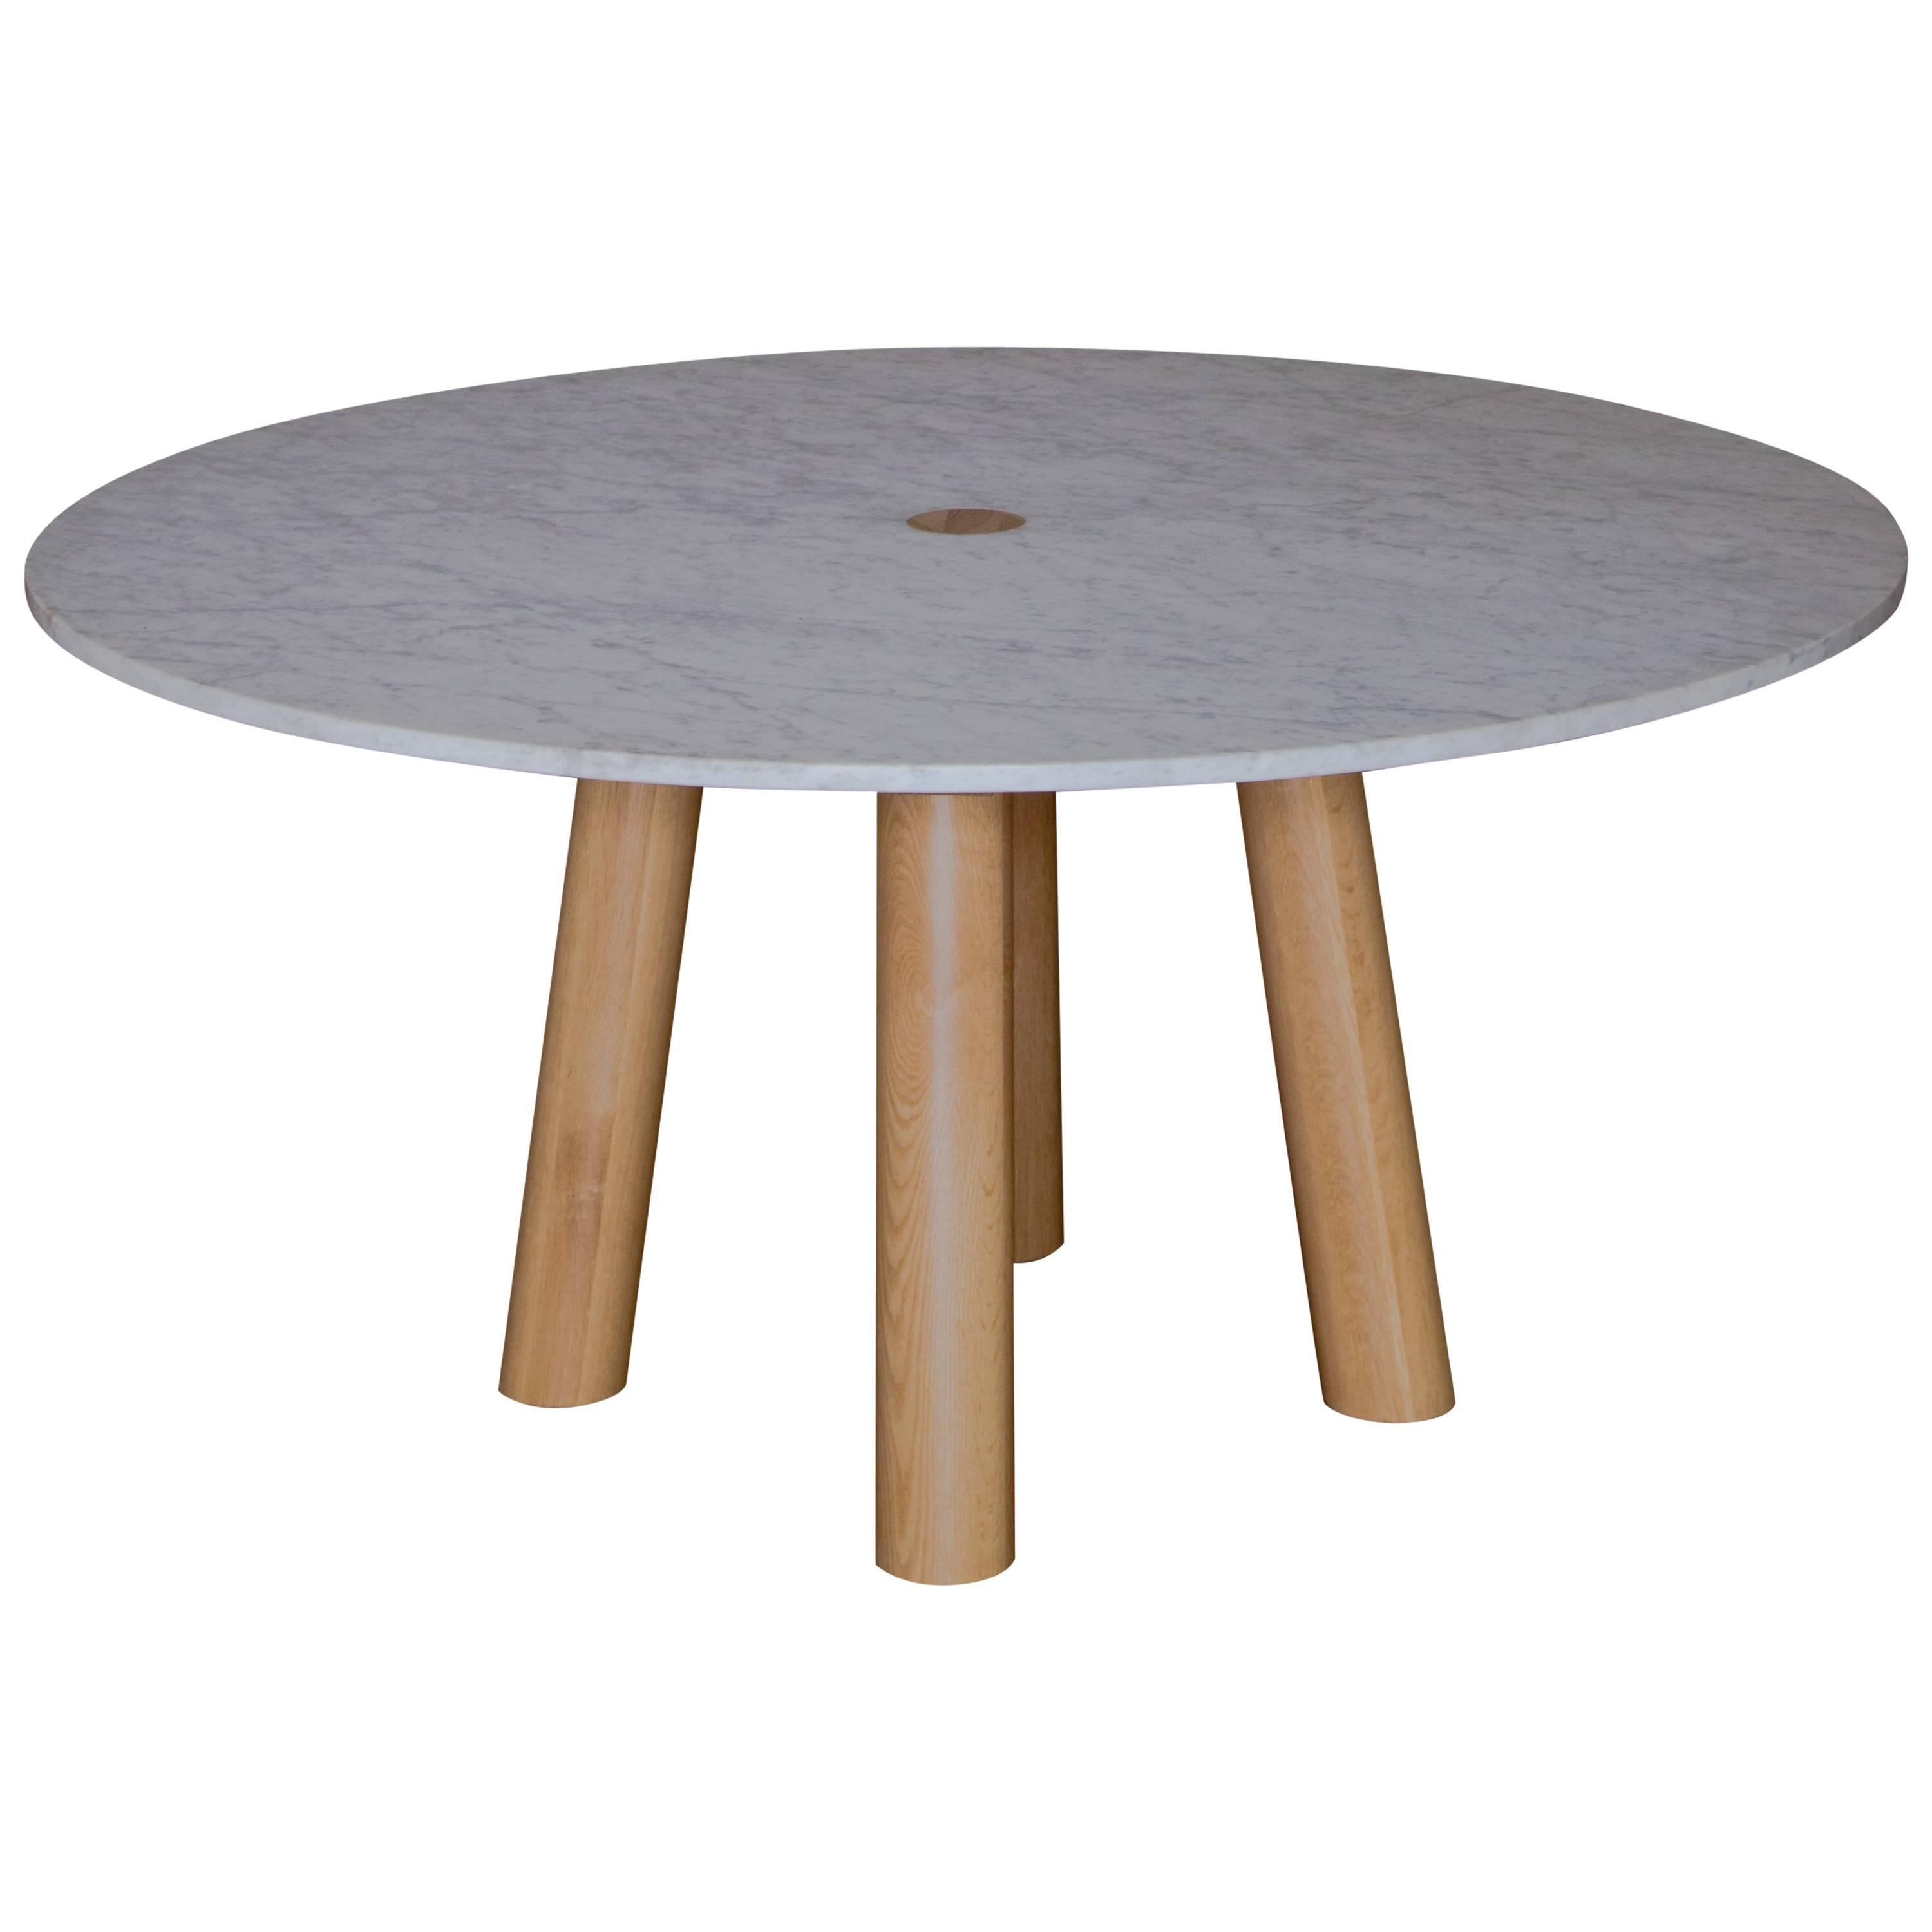 Round Stone Column Dining Table in Marble and White Oak Wood by Fort Standard